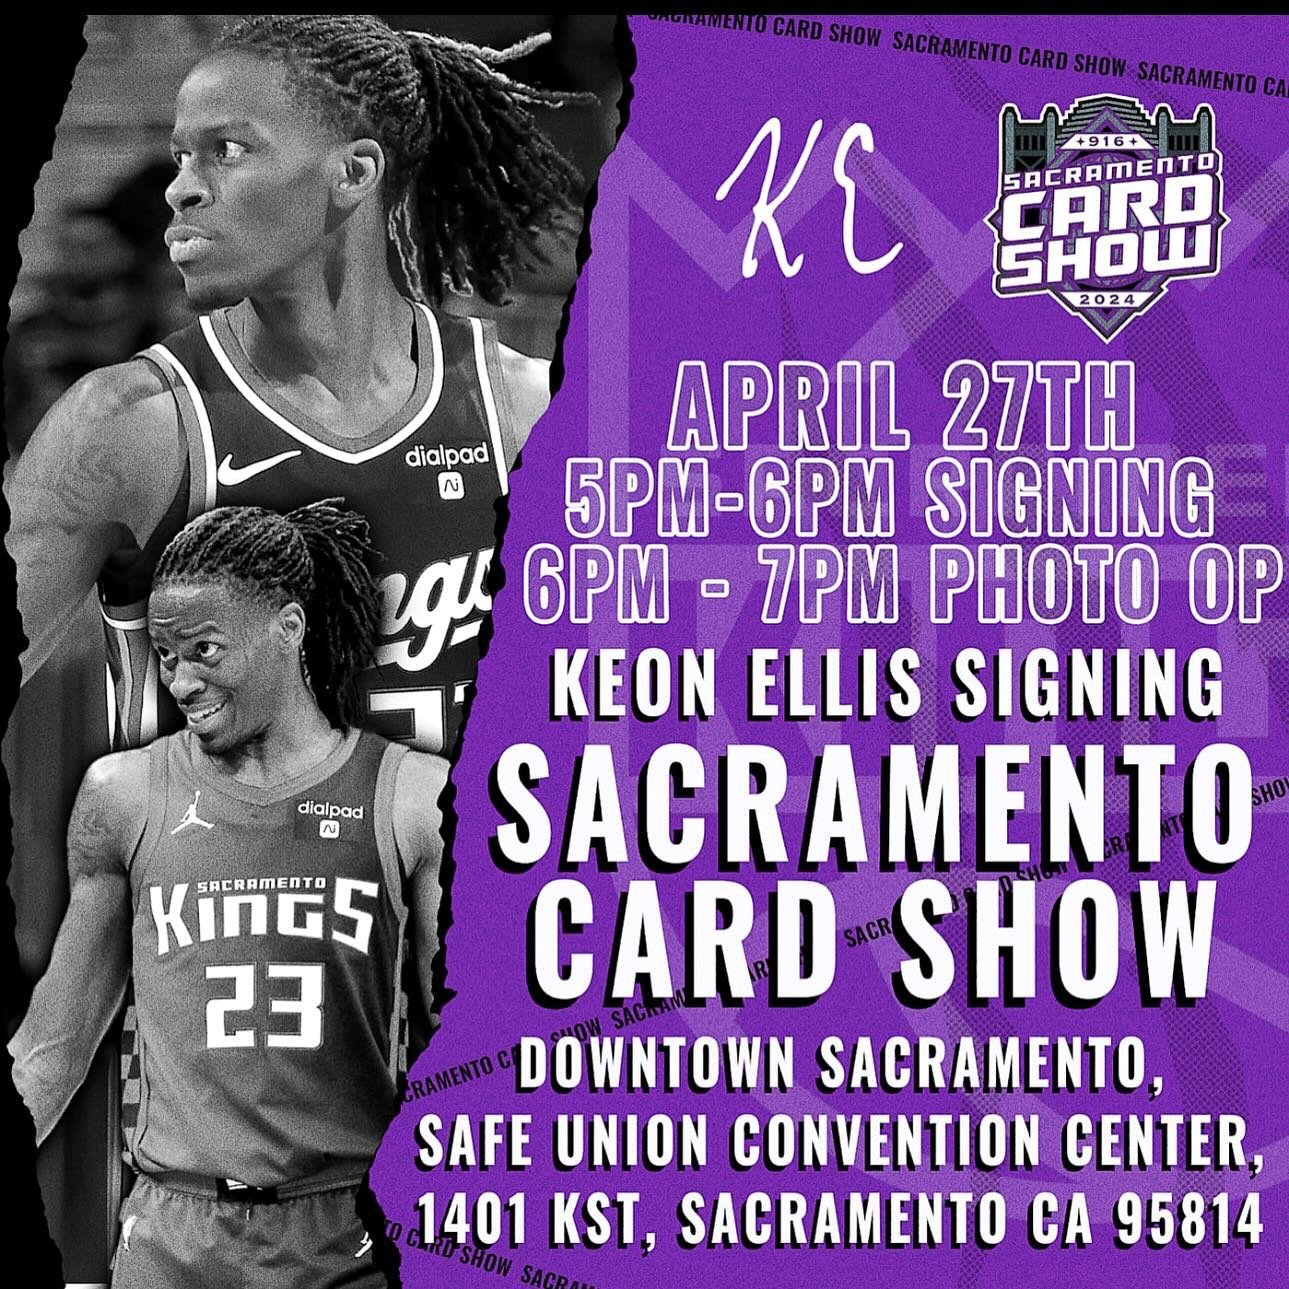 SURPRISE! WE HAVE @kkeon4 COMING TO THE SHOW THIS WEEKEND!!!! He will be signing autos and taking pics! We are so thankful for him to be our second guest at the sac show!